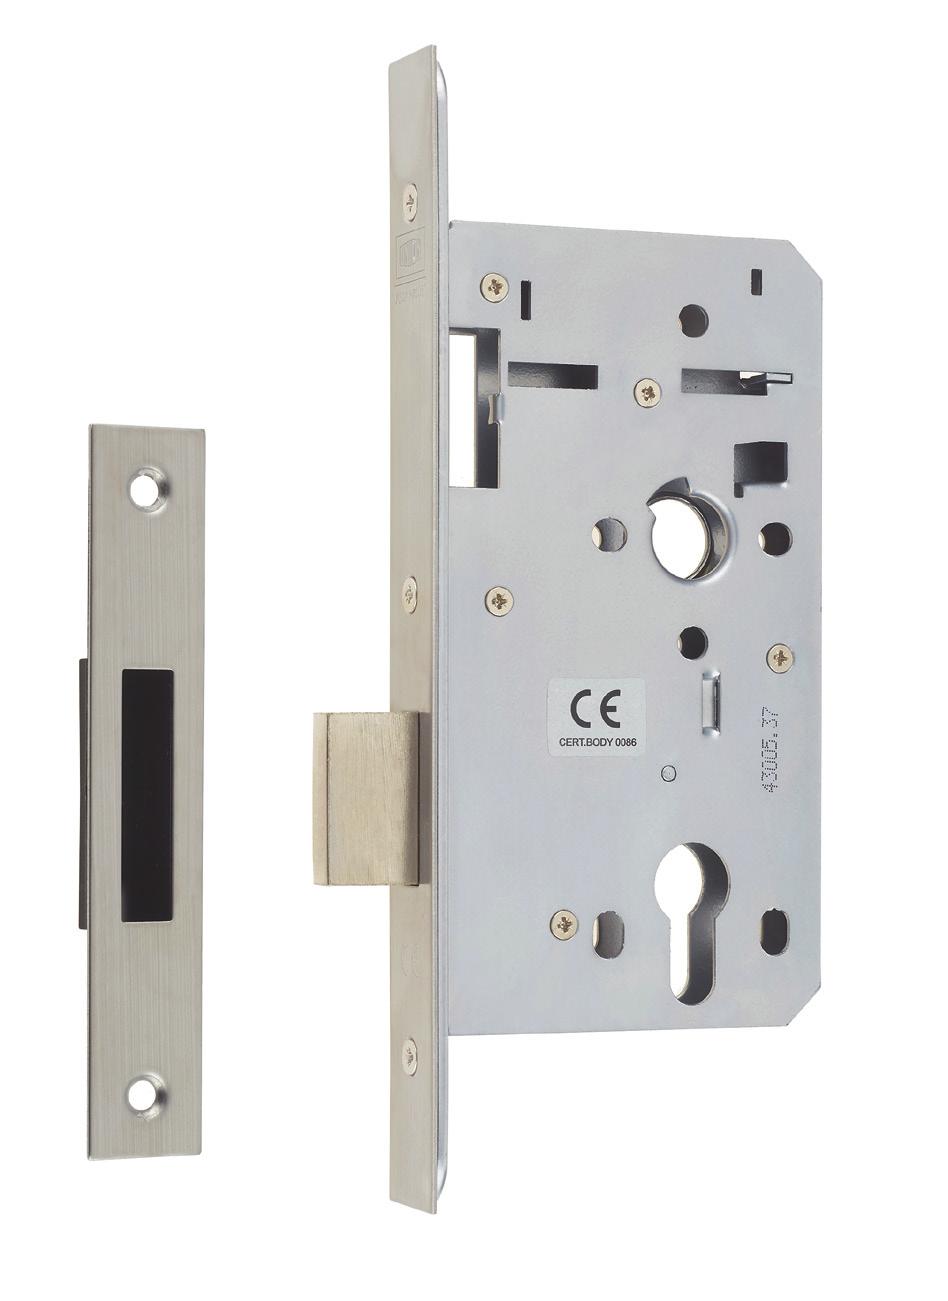 Euro Profile Cylinder Mortice Deadlock Product available with square or radius forend JHD72DL-S-SS60 HD72 Deadlock Square forend Stainless Steel 60mm Backset APPROVED PRODUCT CF5543 JHD72DL-R-SS60